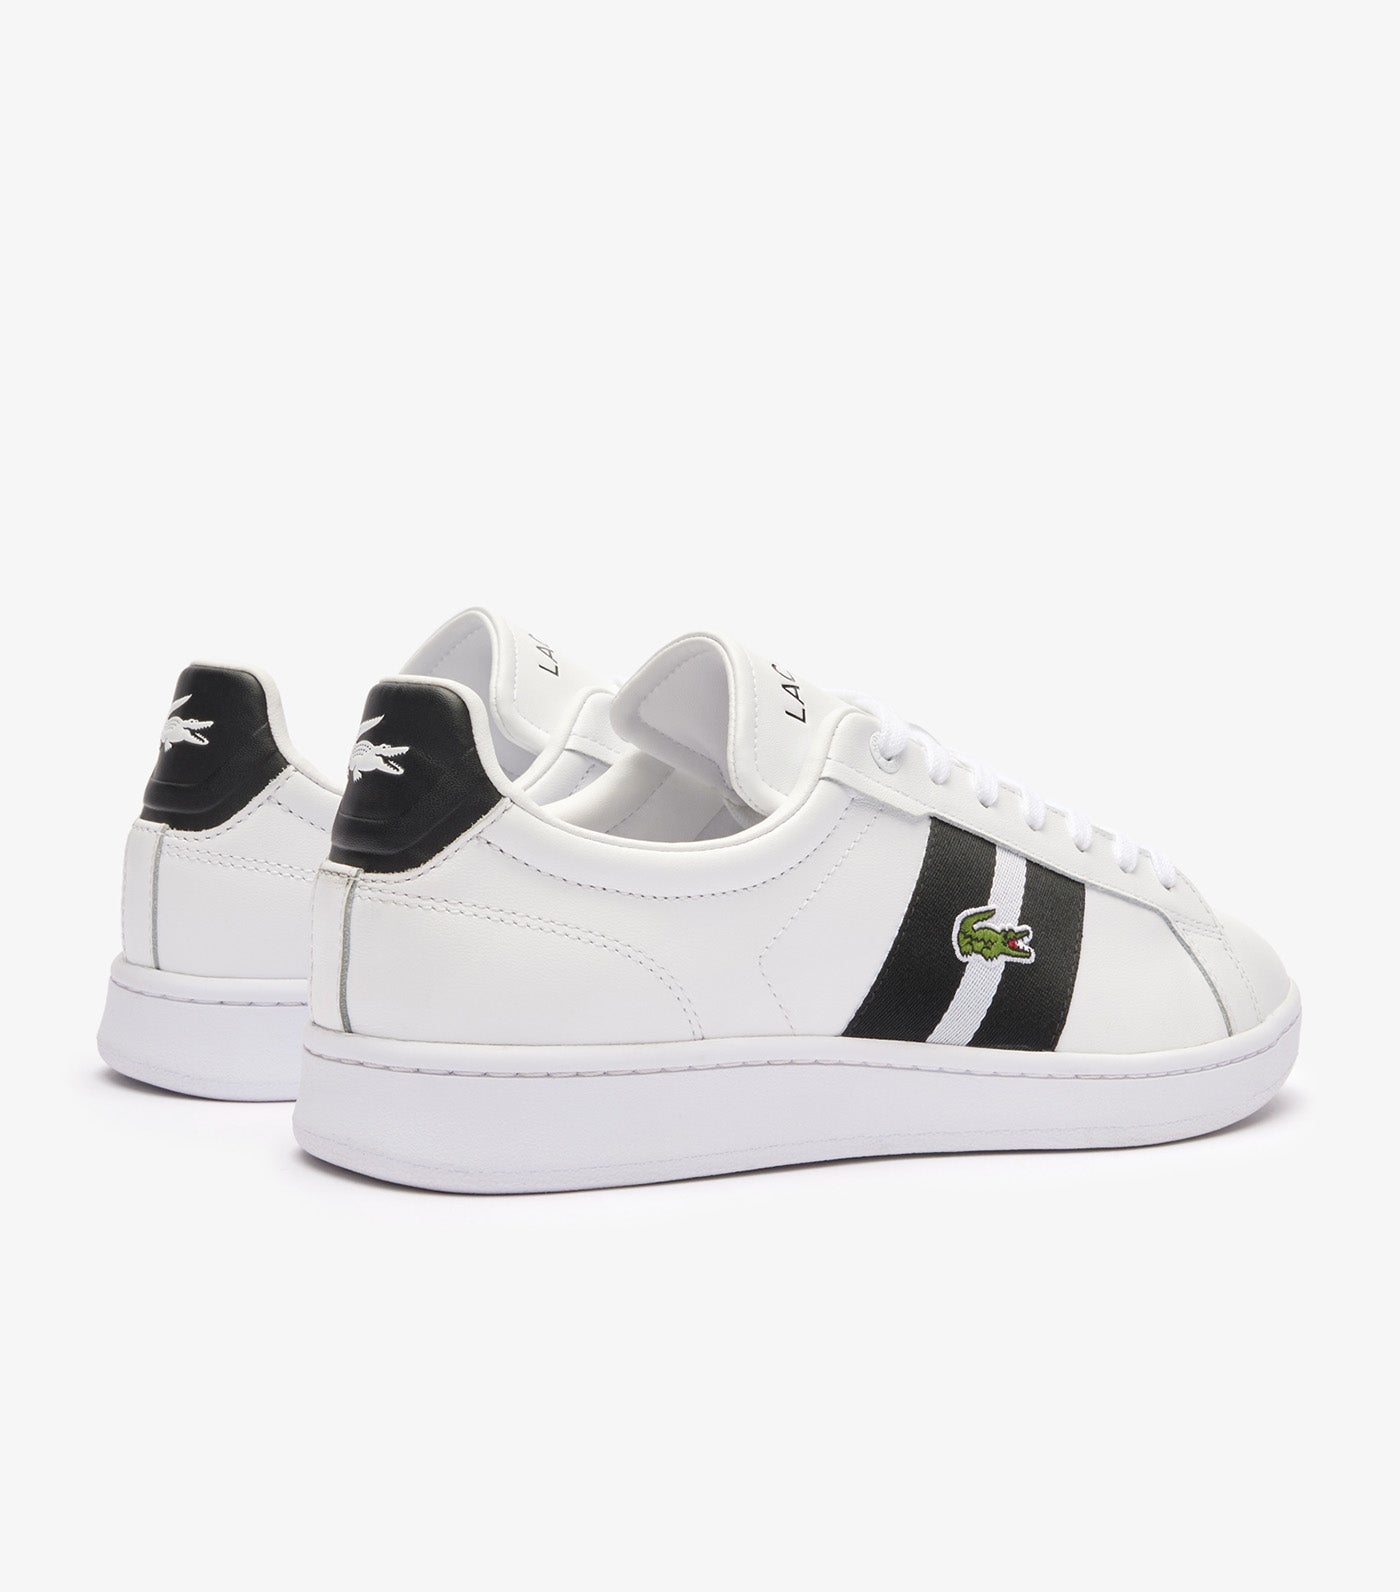 Men's Carnaby Pro CGR Bar Leather Trainers White/Black